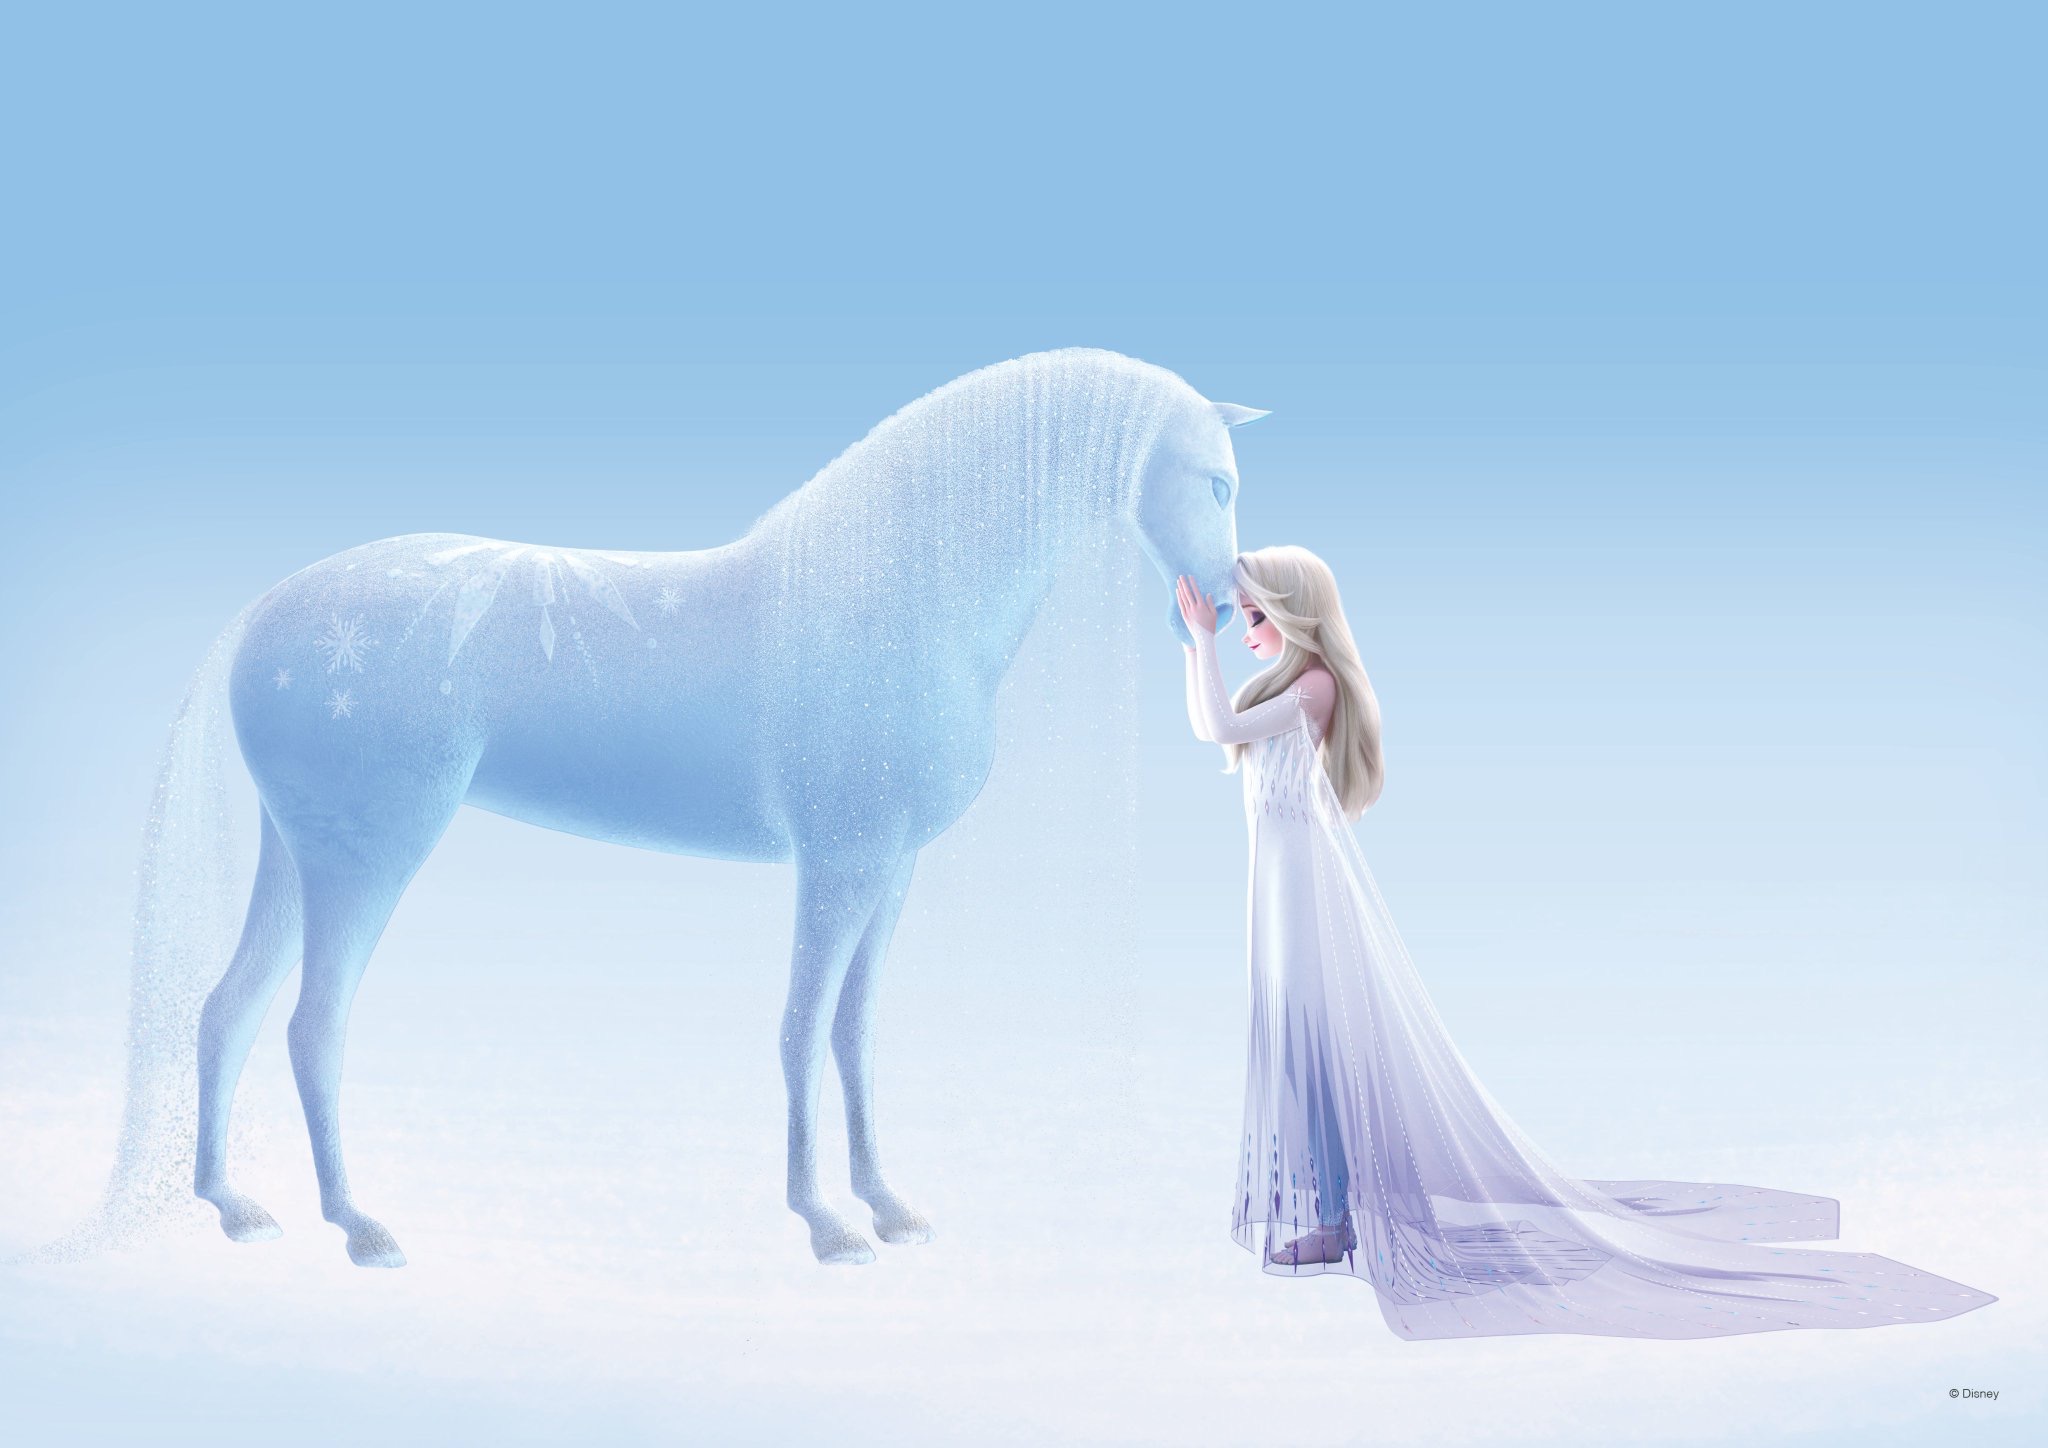 new-image-of-elsa-in-white-dress-shows-details-of-frozen-version-of-the